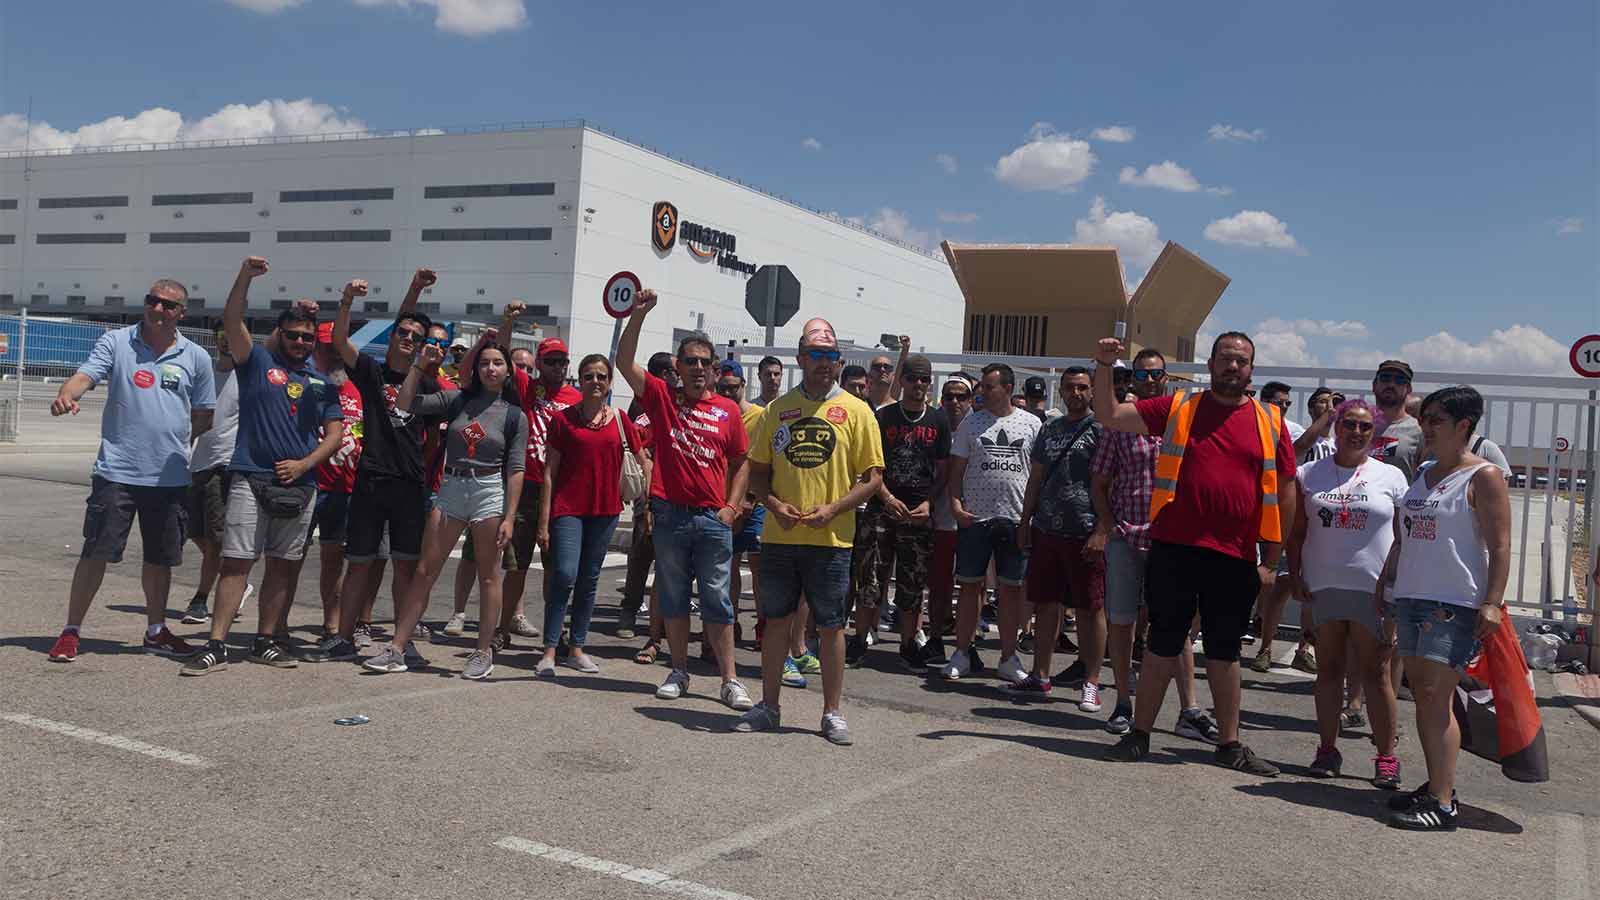 Amazon workers in Spain blocking trucks from entering the warehouse during the strike on Prime Day. July 16, 2018 (Photo by Lito Lizana/SOPA Images/LightRocket via Getty Images IL)